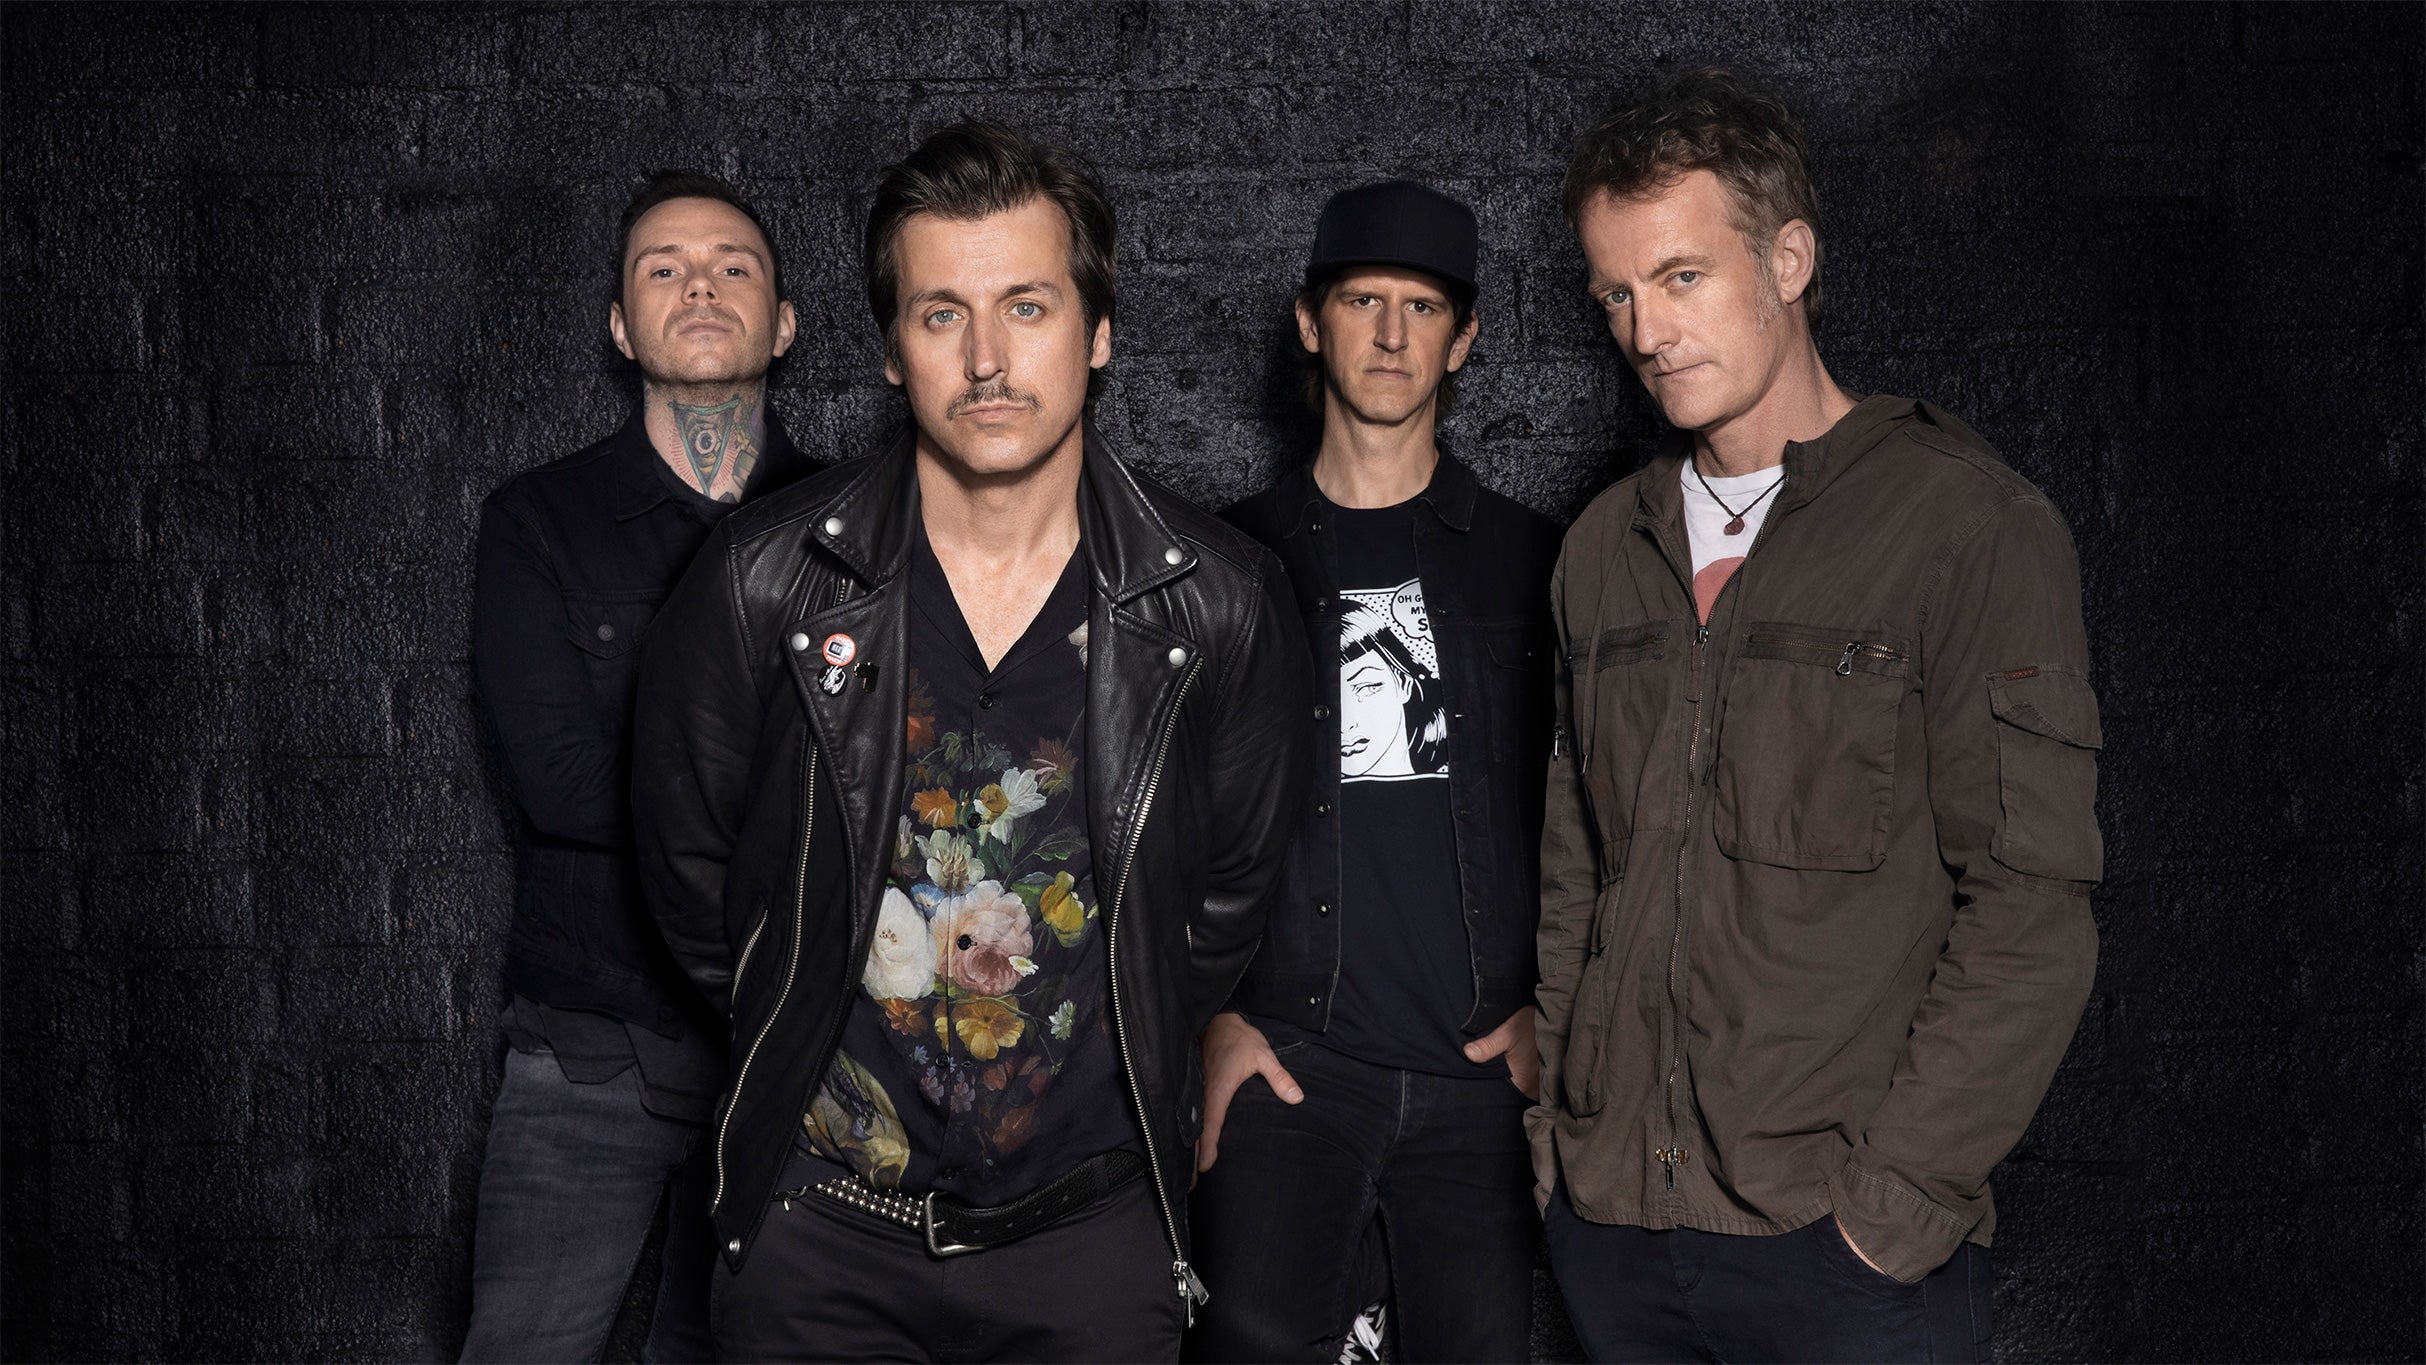 Our Lady Peace free pre-sale code for early tickets in Windsor